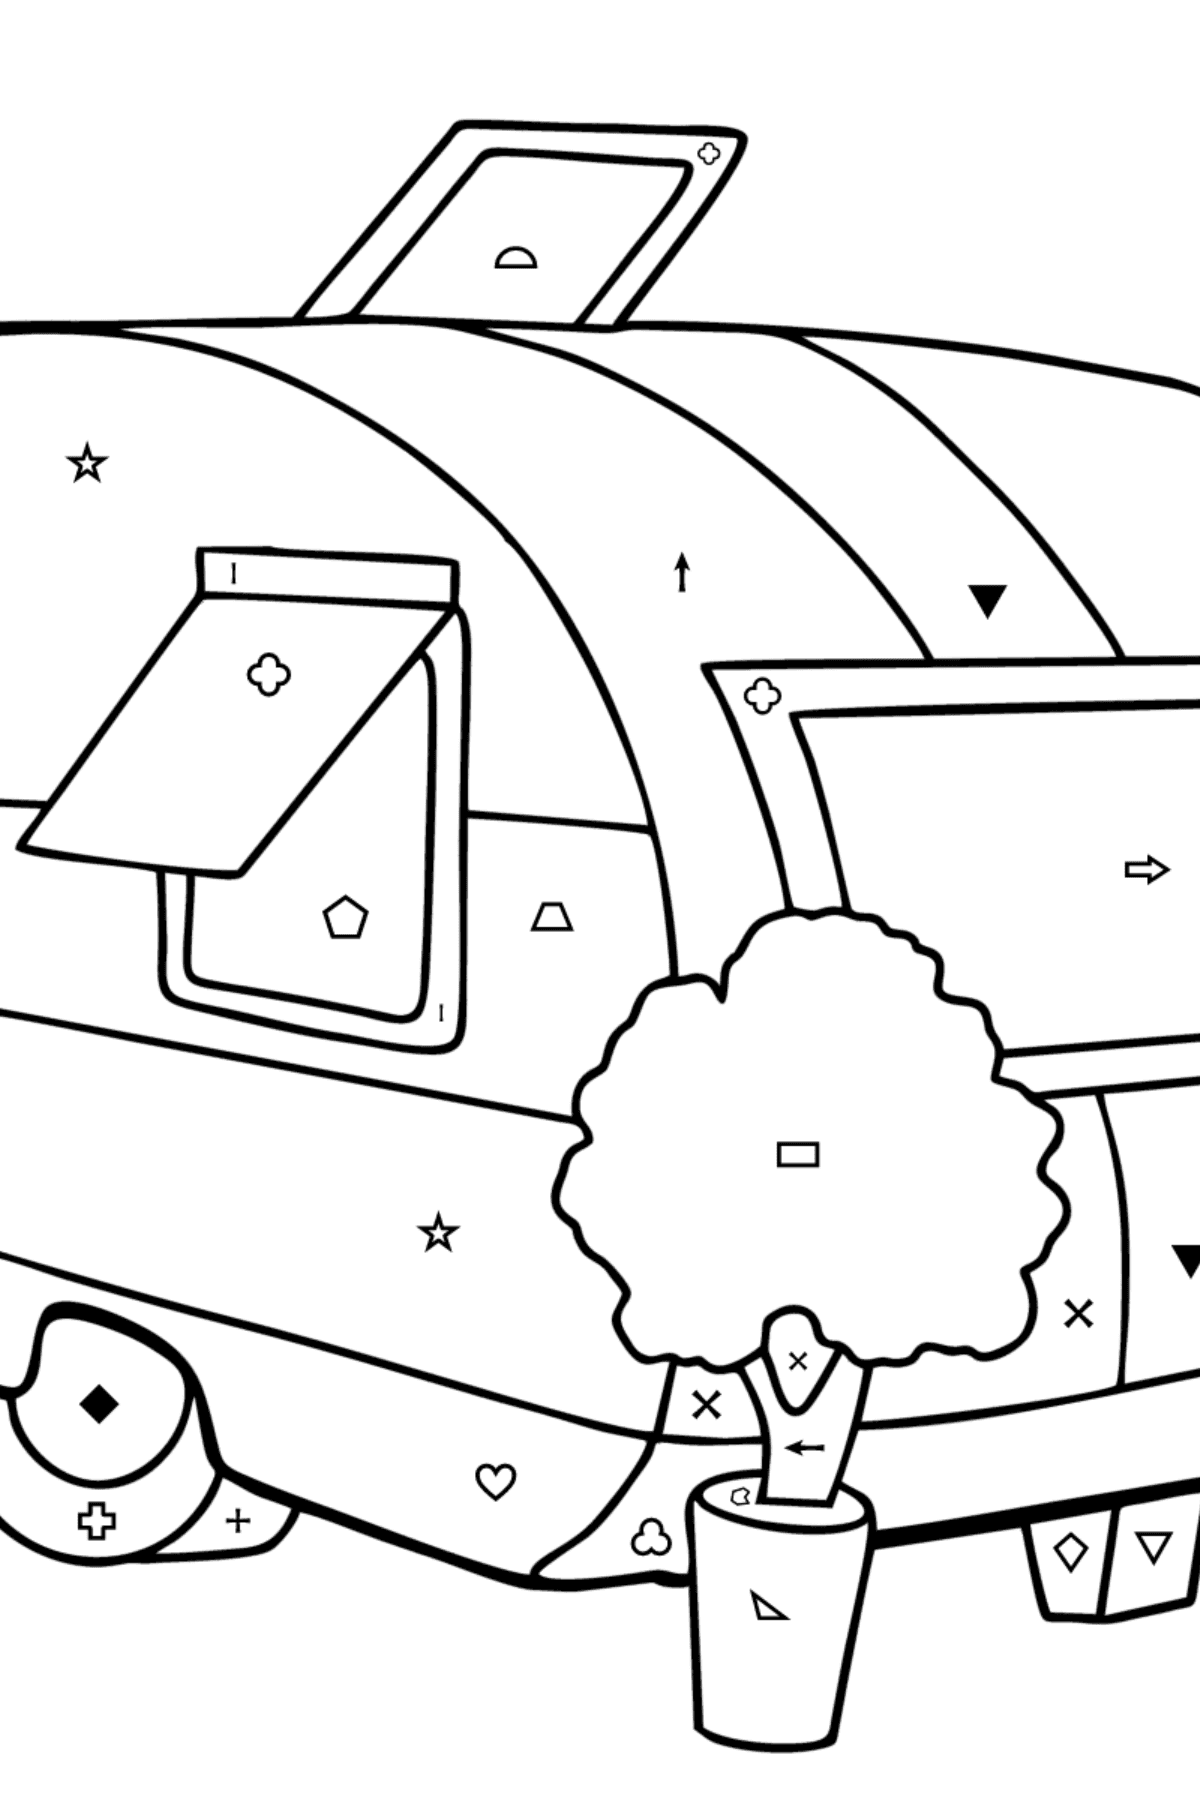 Camper Coloring Page - Coloring by Symbols and Geometric Shapes for Kids